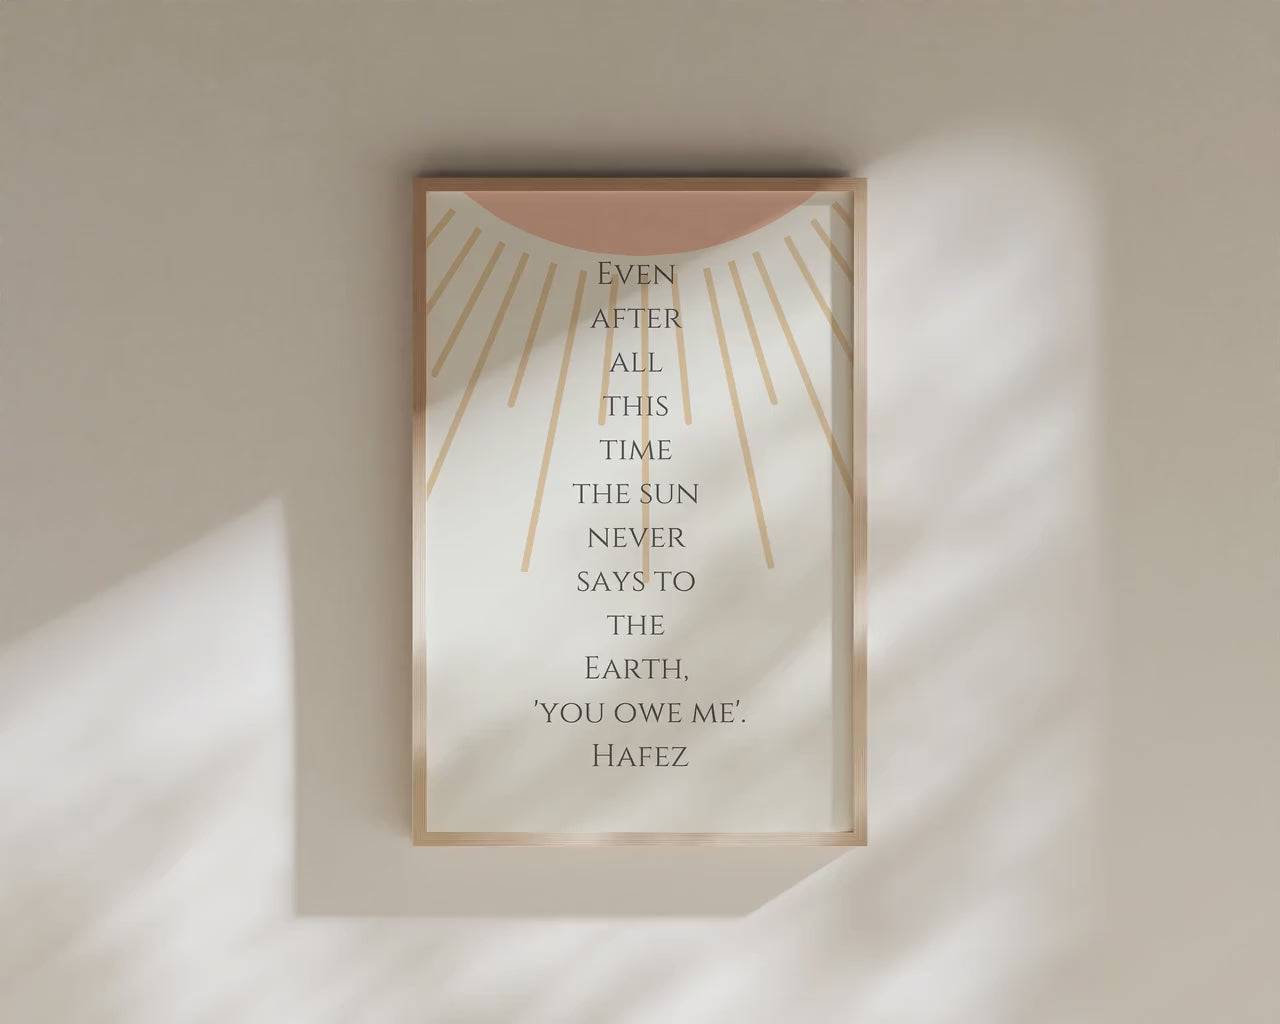 Hafez - The Sun | Beige Inspirational Quote Poetry Poster (available framed or unframed)